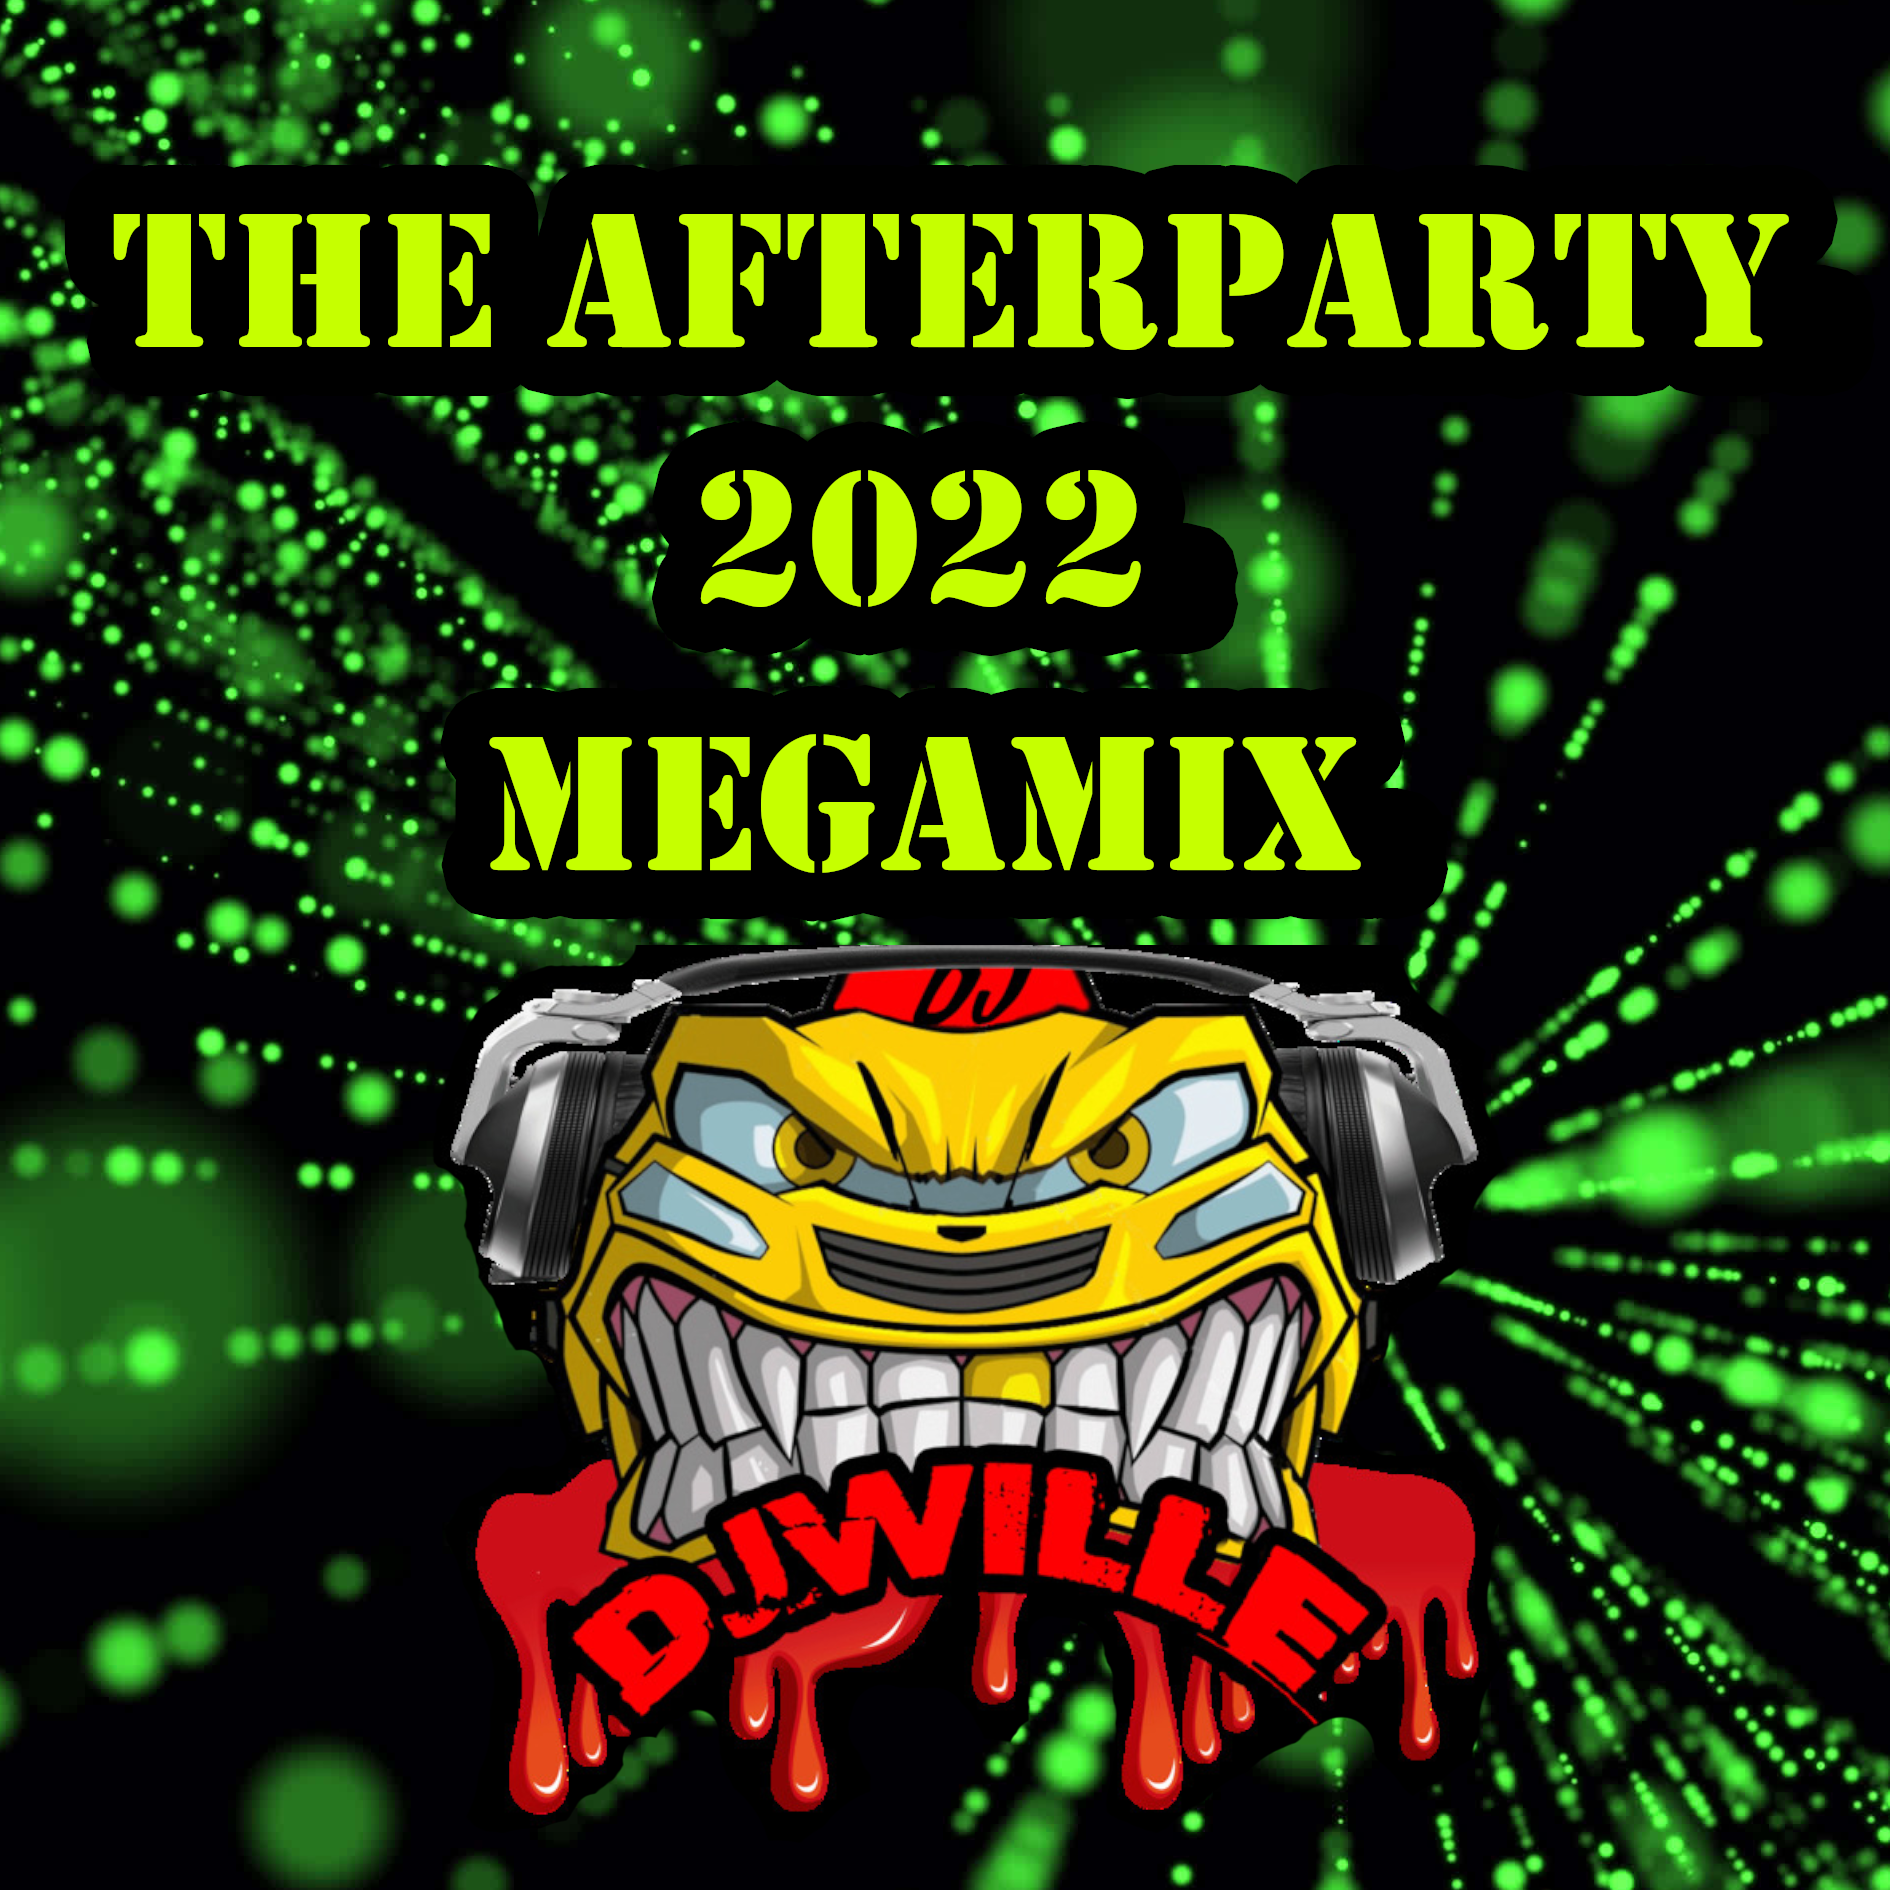 The After Party 2022 Megamix - Mixed by DJ Wille